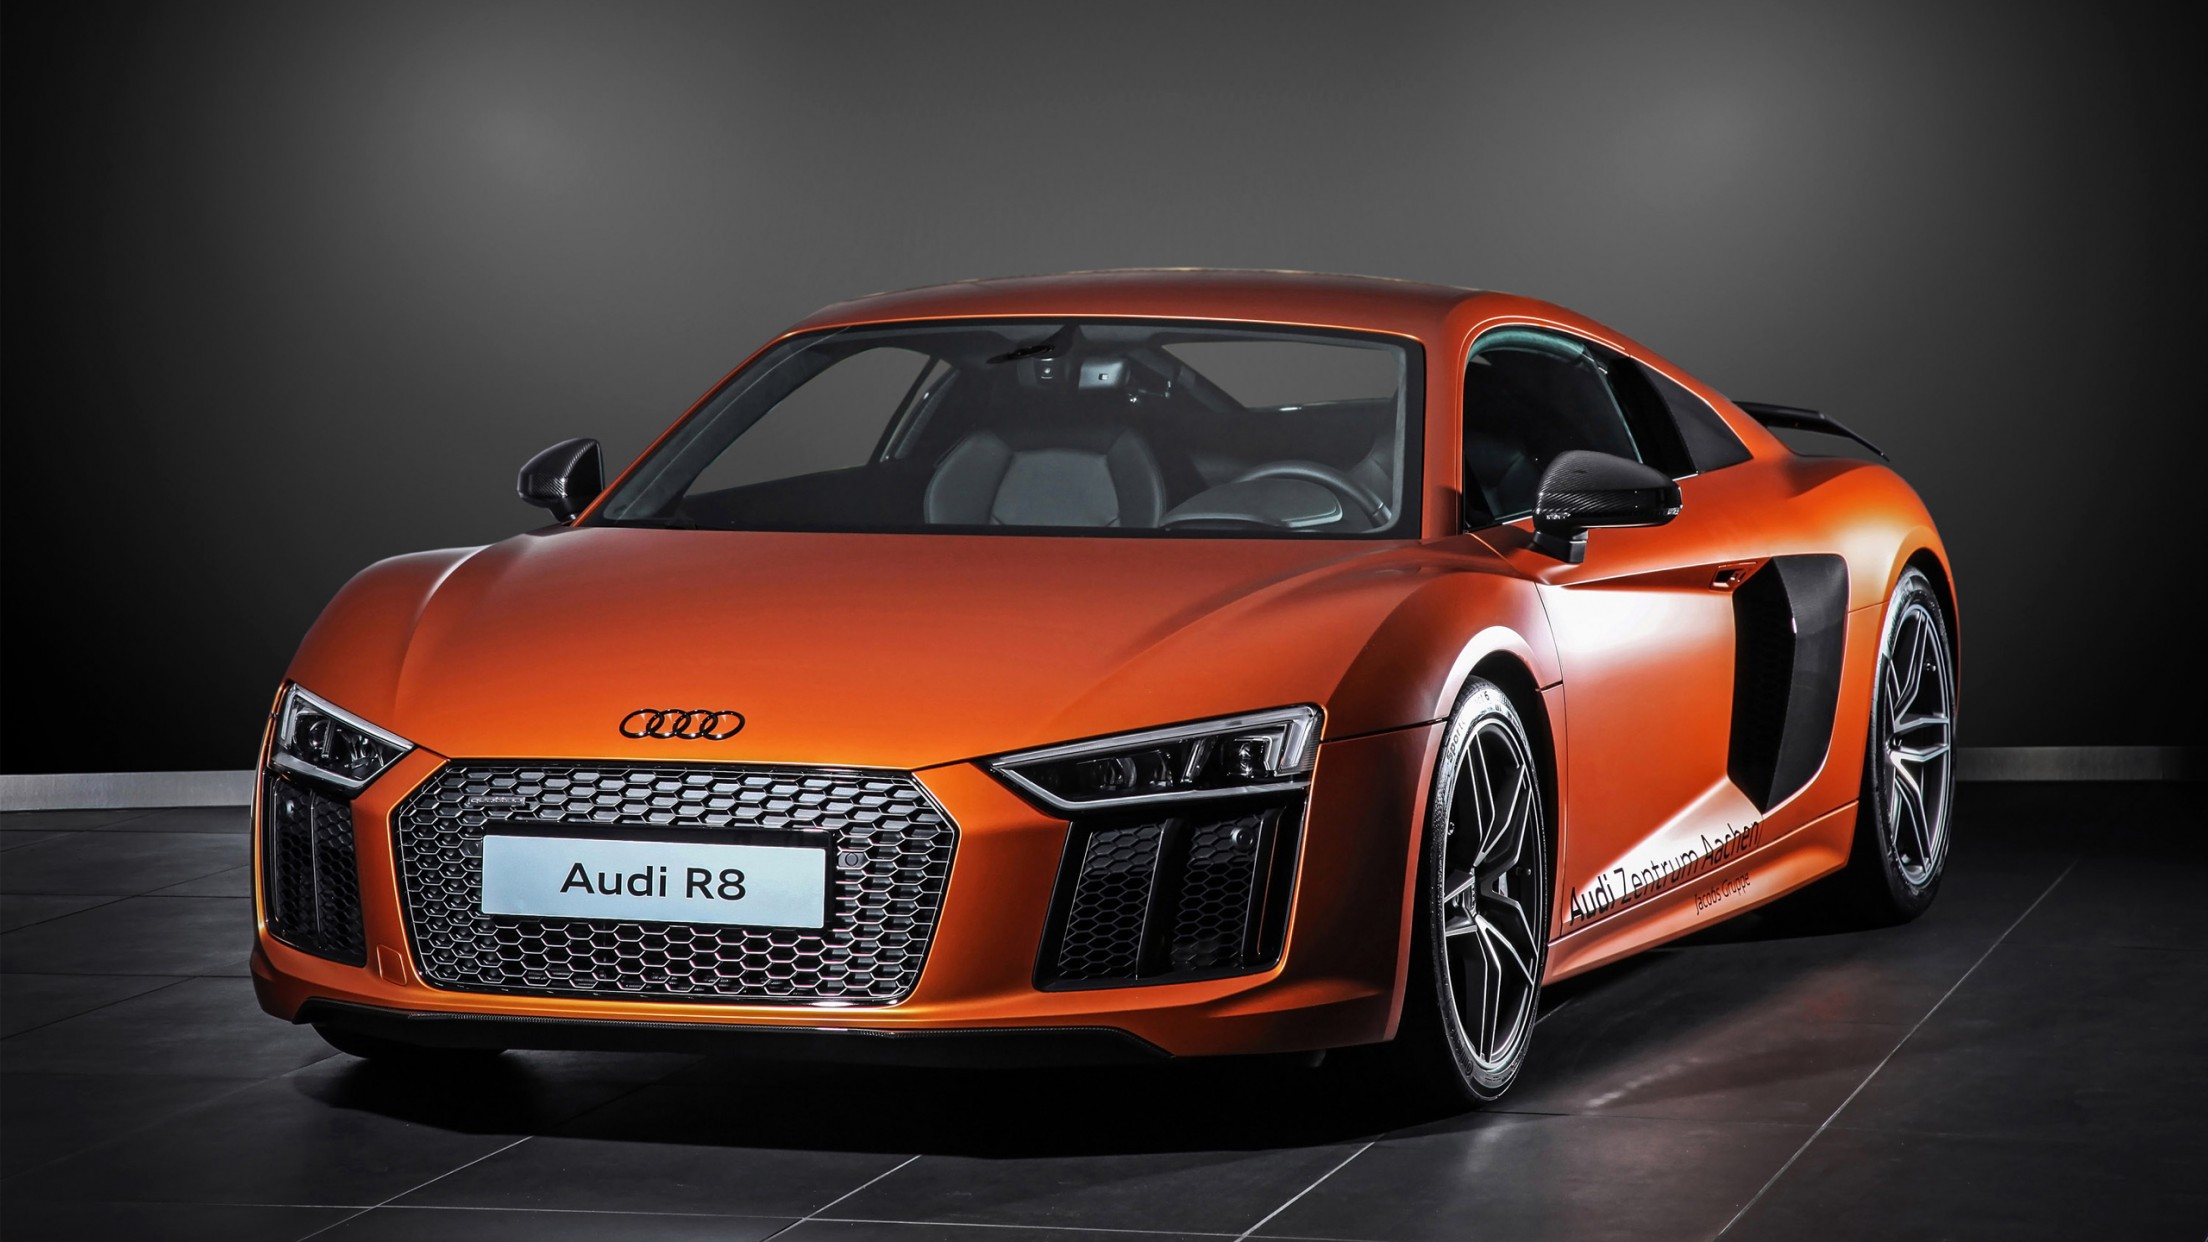 Audi R8 e-tron Wallpapers Images Photos Pictures Backgrounds